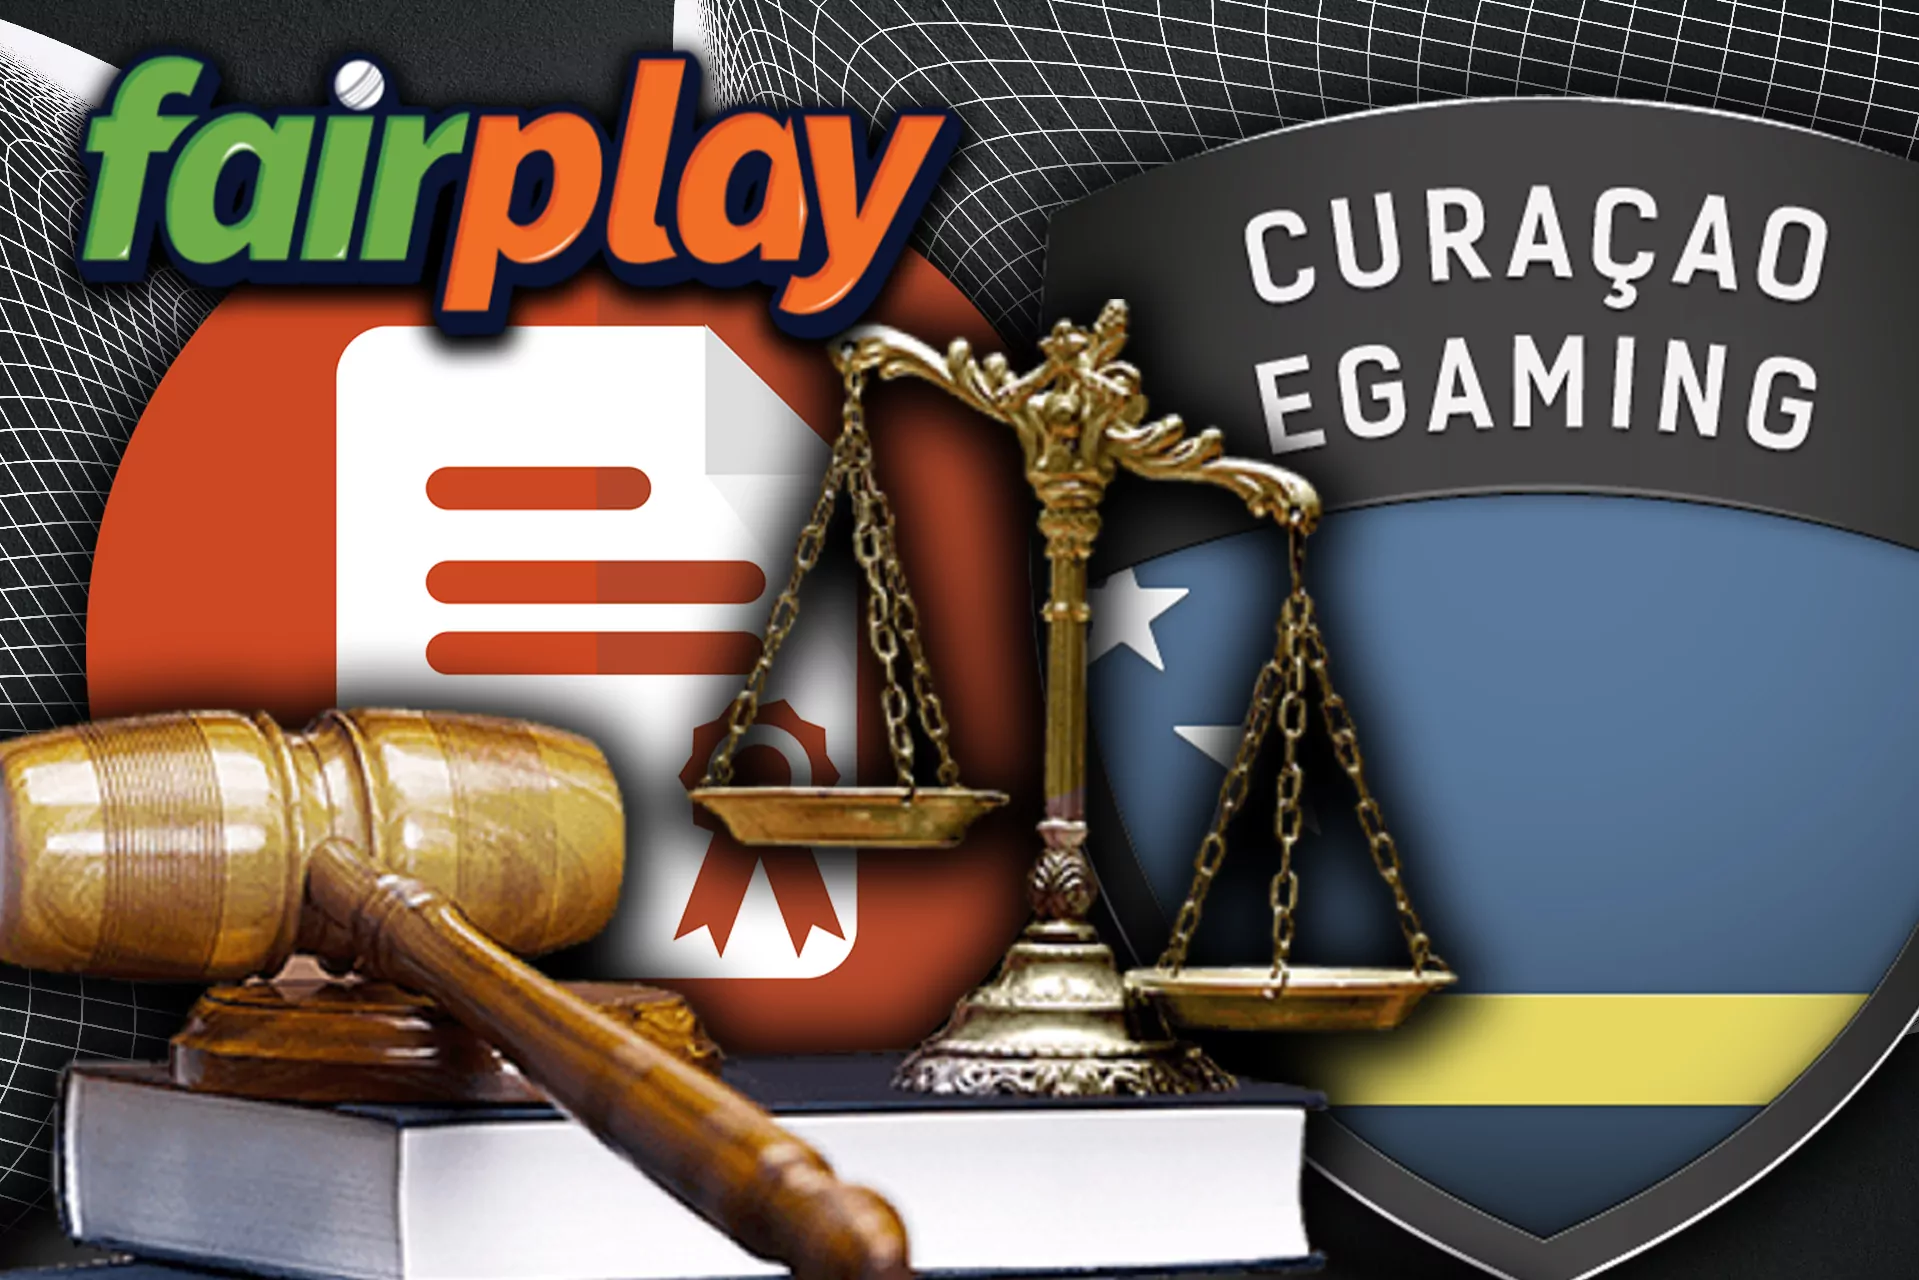 Fairplay meet all the requirements of the Curacao Commission.